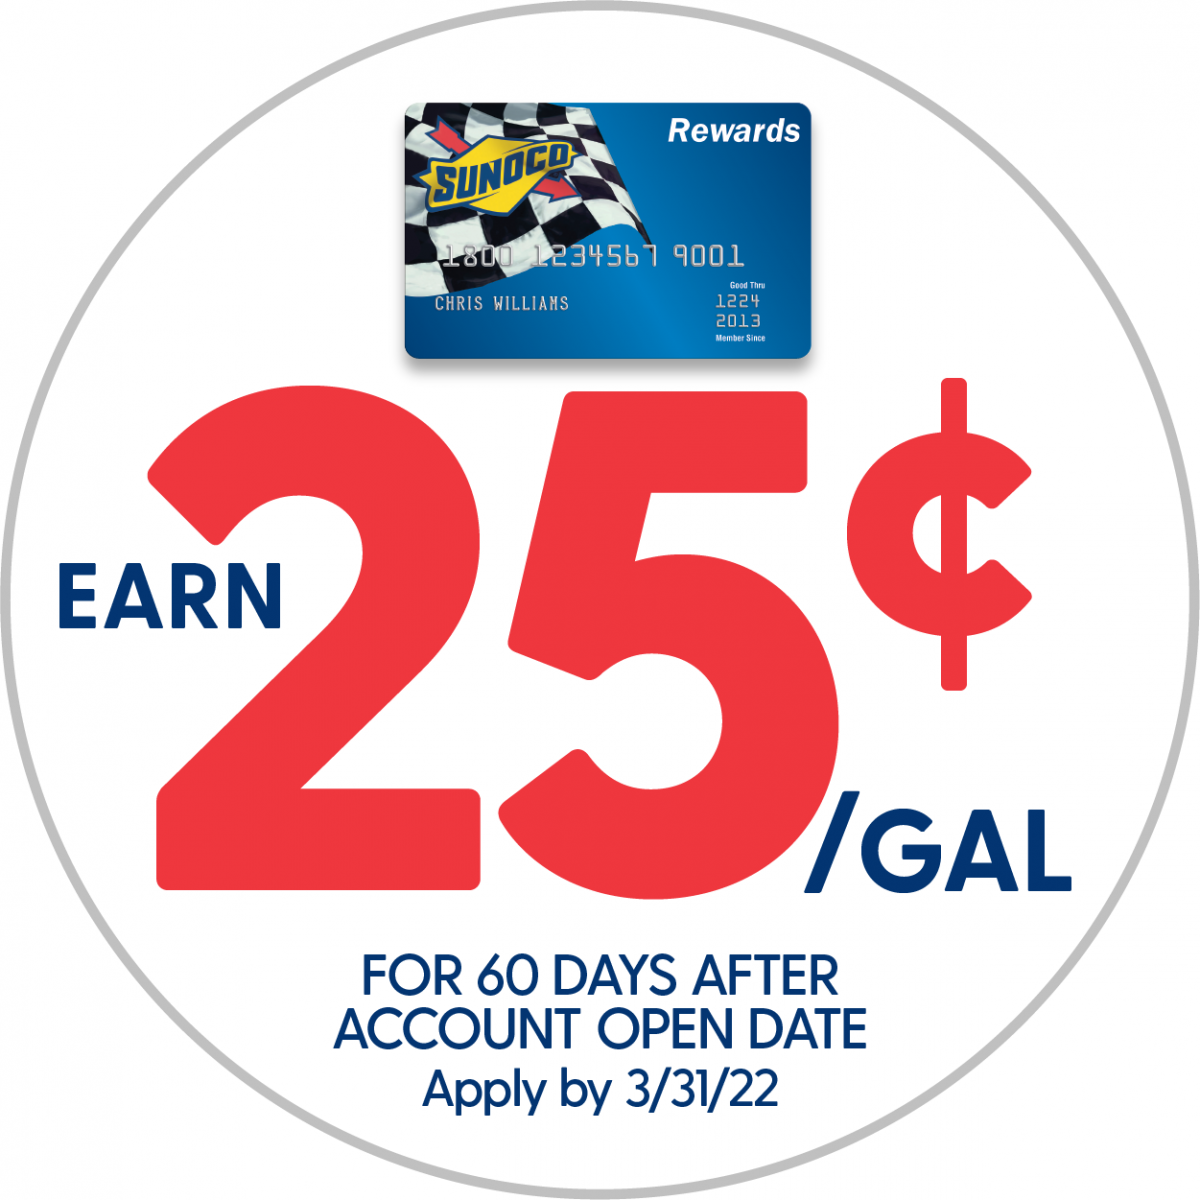 Earn 15¢ off per gallon for 90 days after account open date